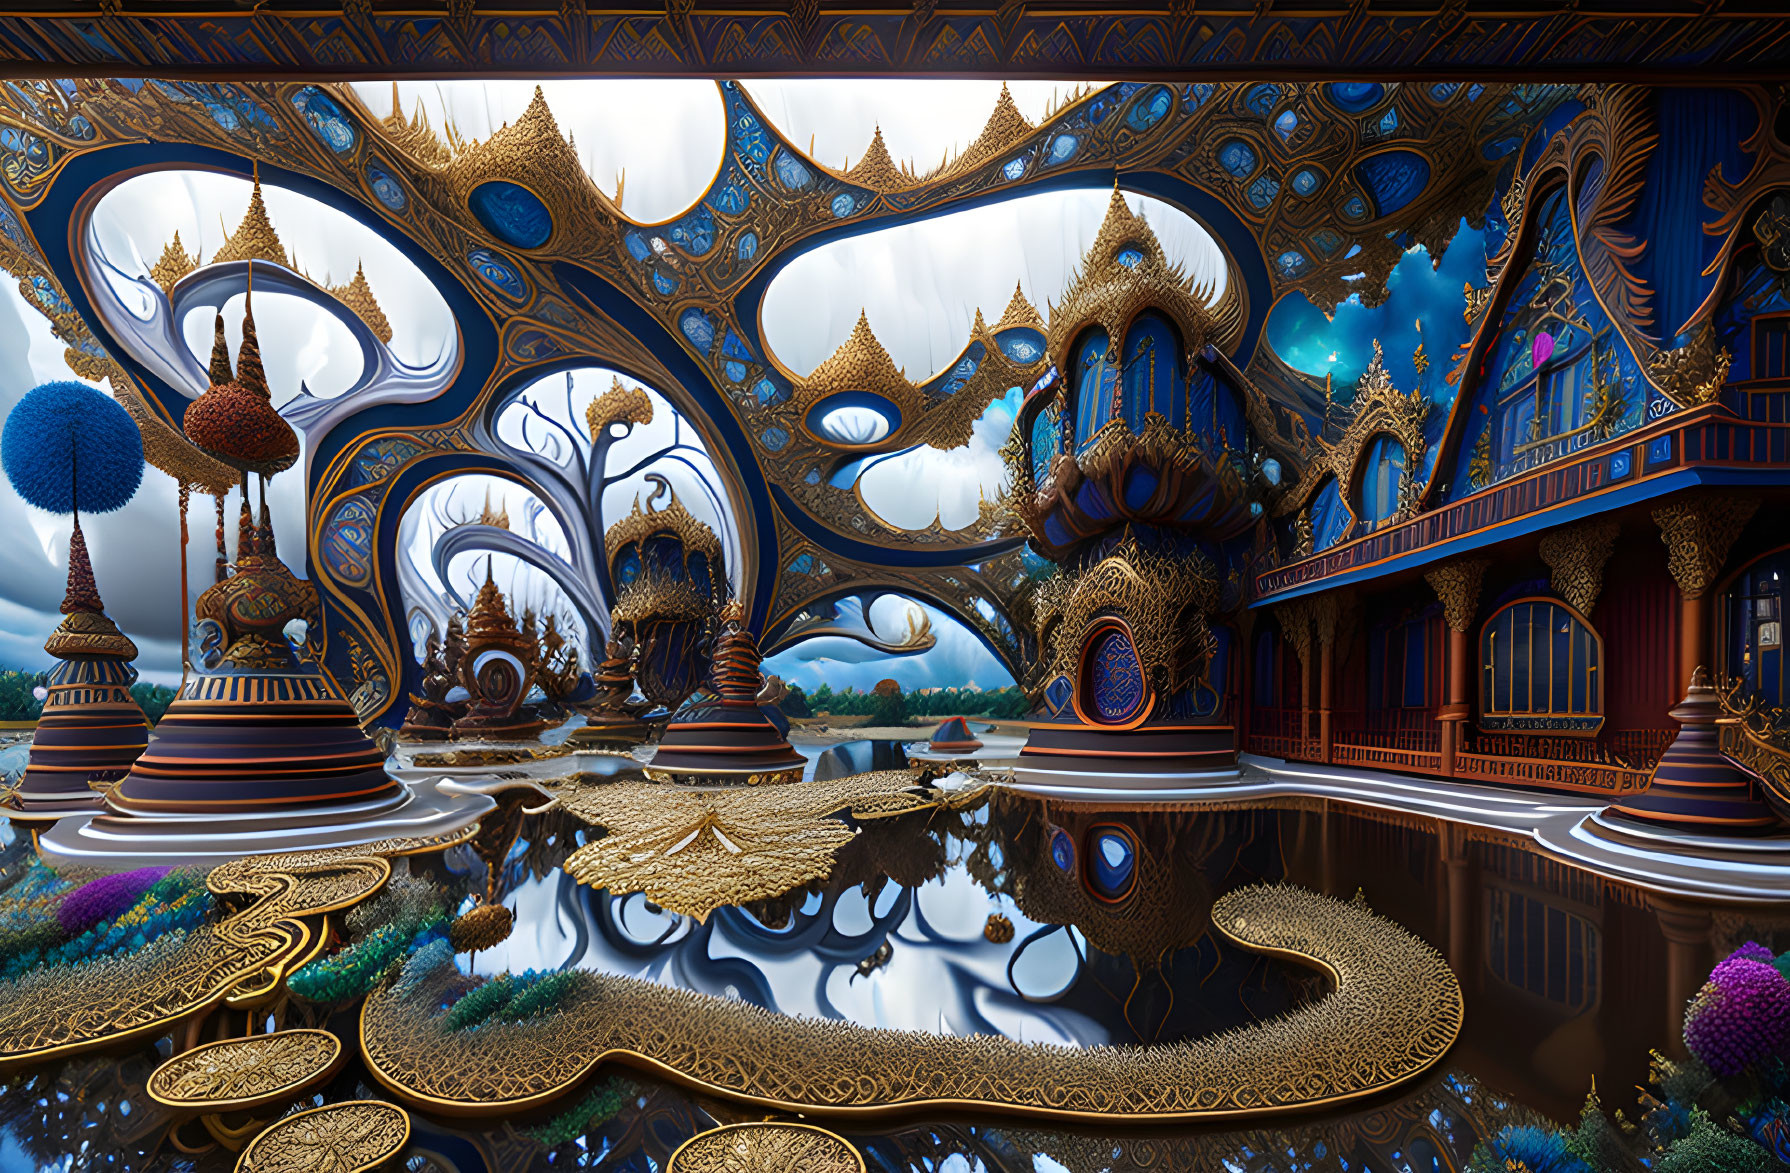 Ornate Gold and Blue Palace with Swirling Designs